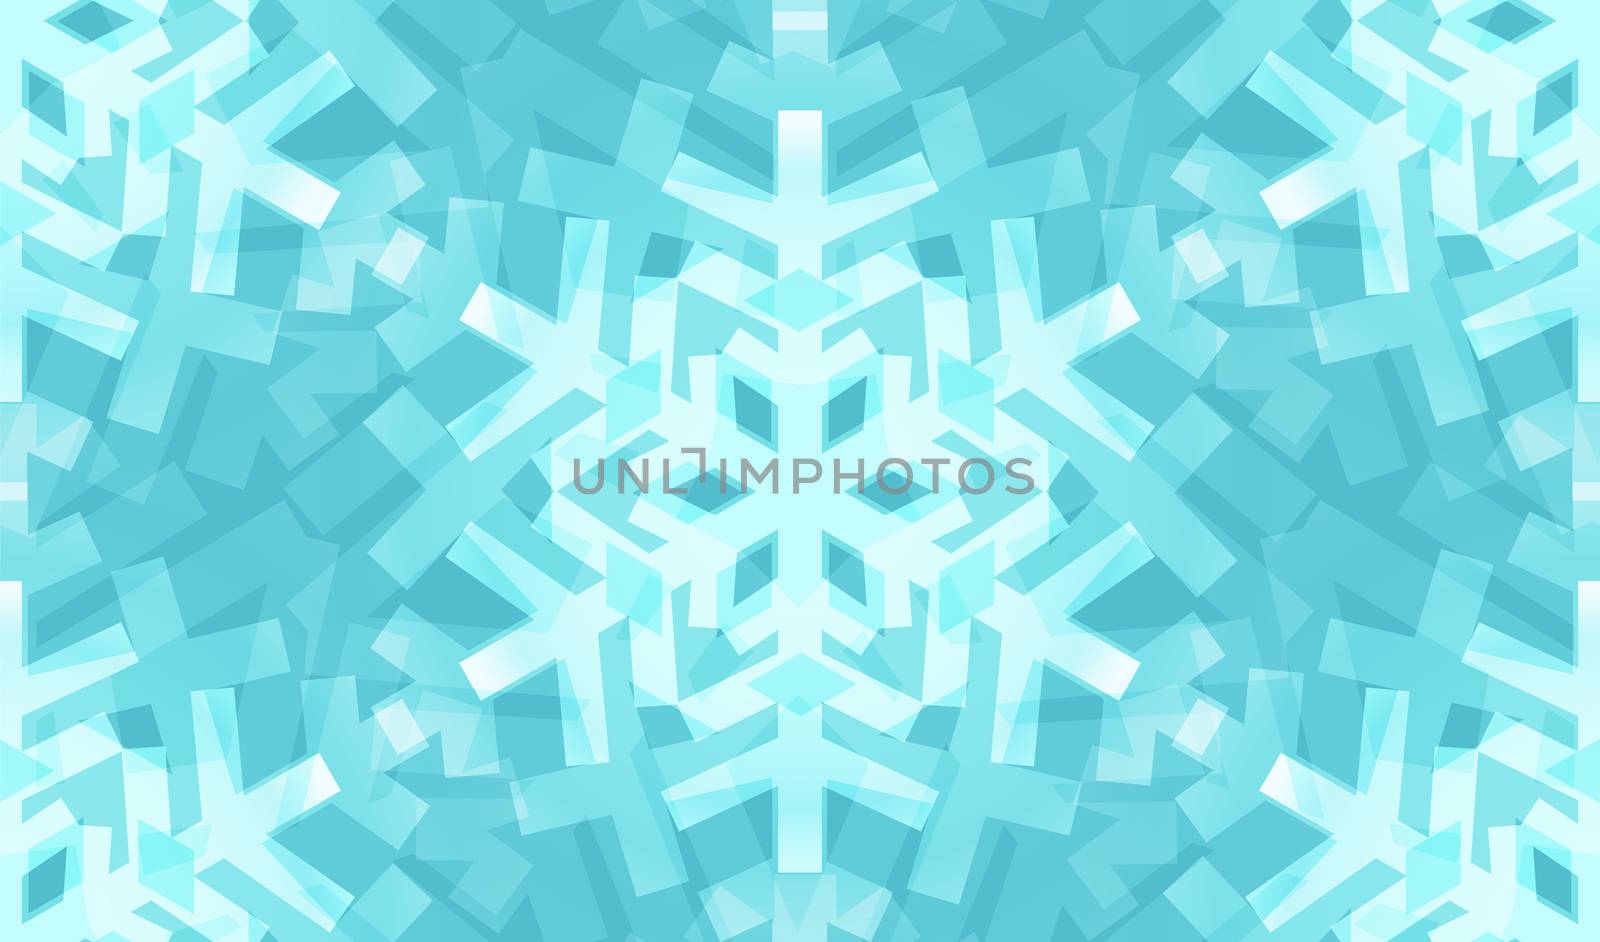 Awesome Shiny Blue Snowflakes Seamless Pattern for Winter or Christmas Desing.